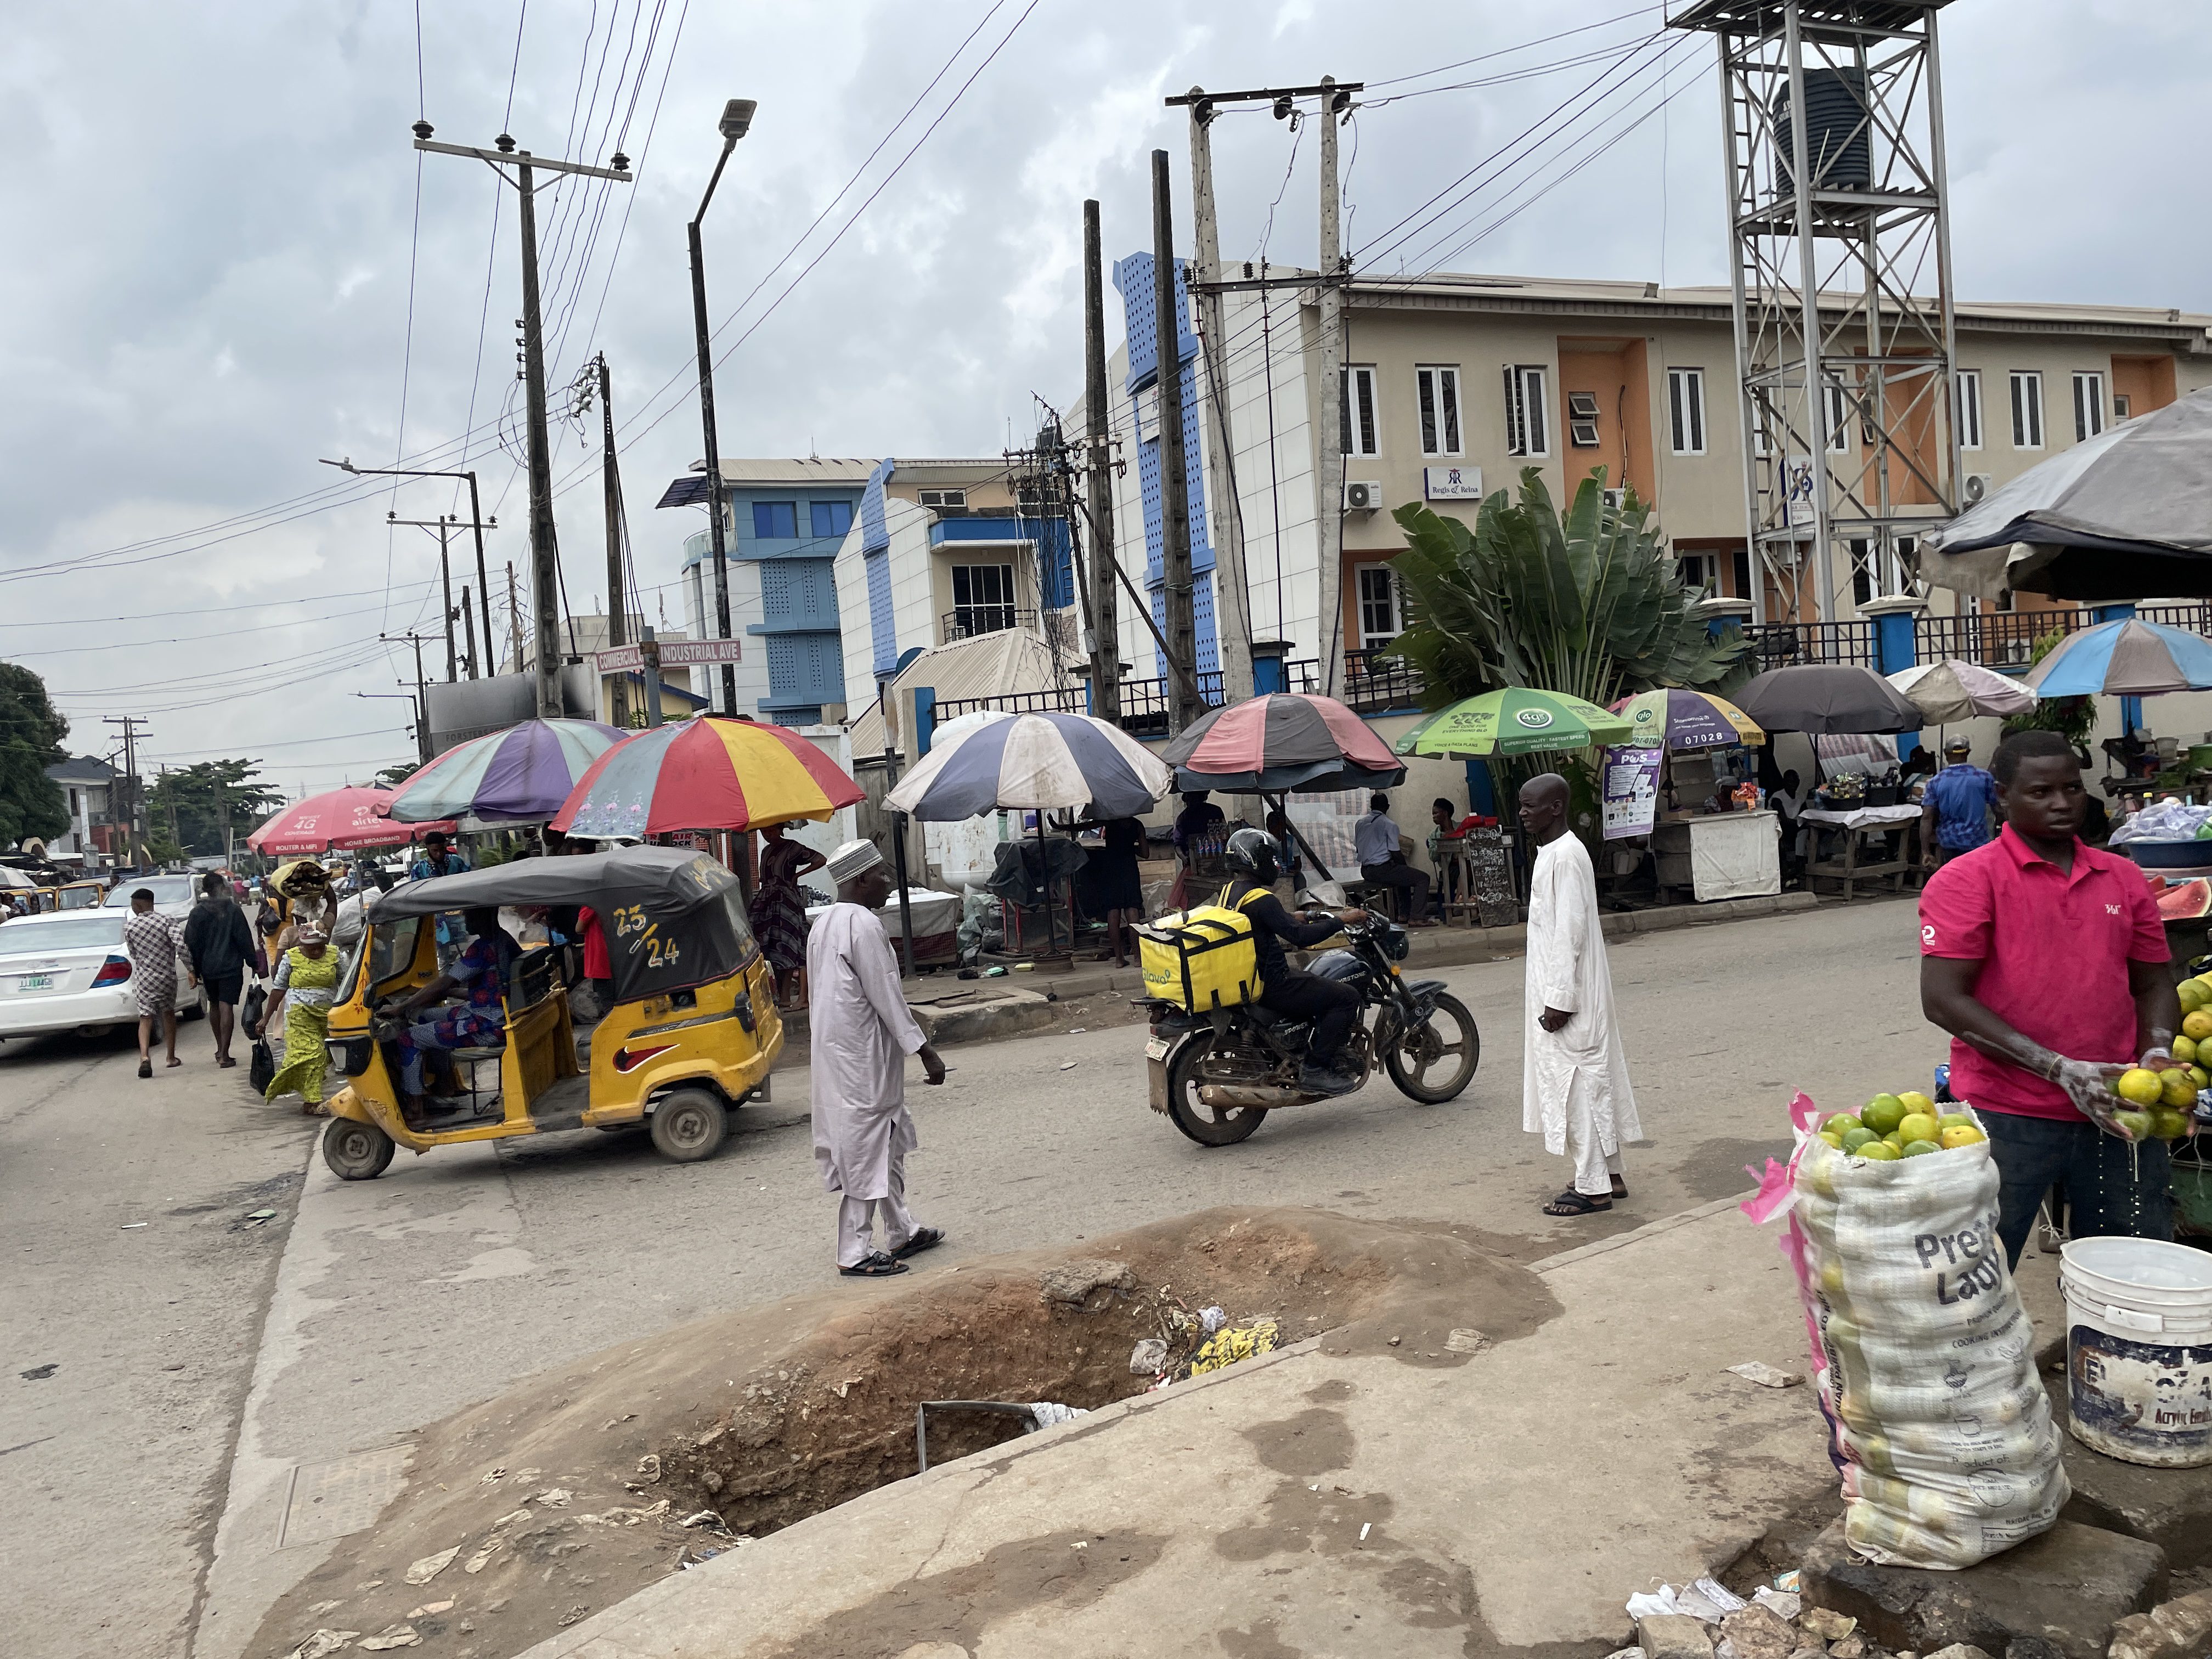 Looking for beautiful days: The real lives of Lagos dispatch riders